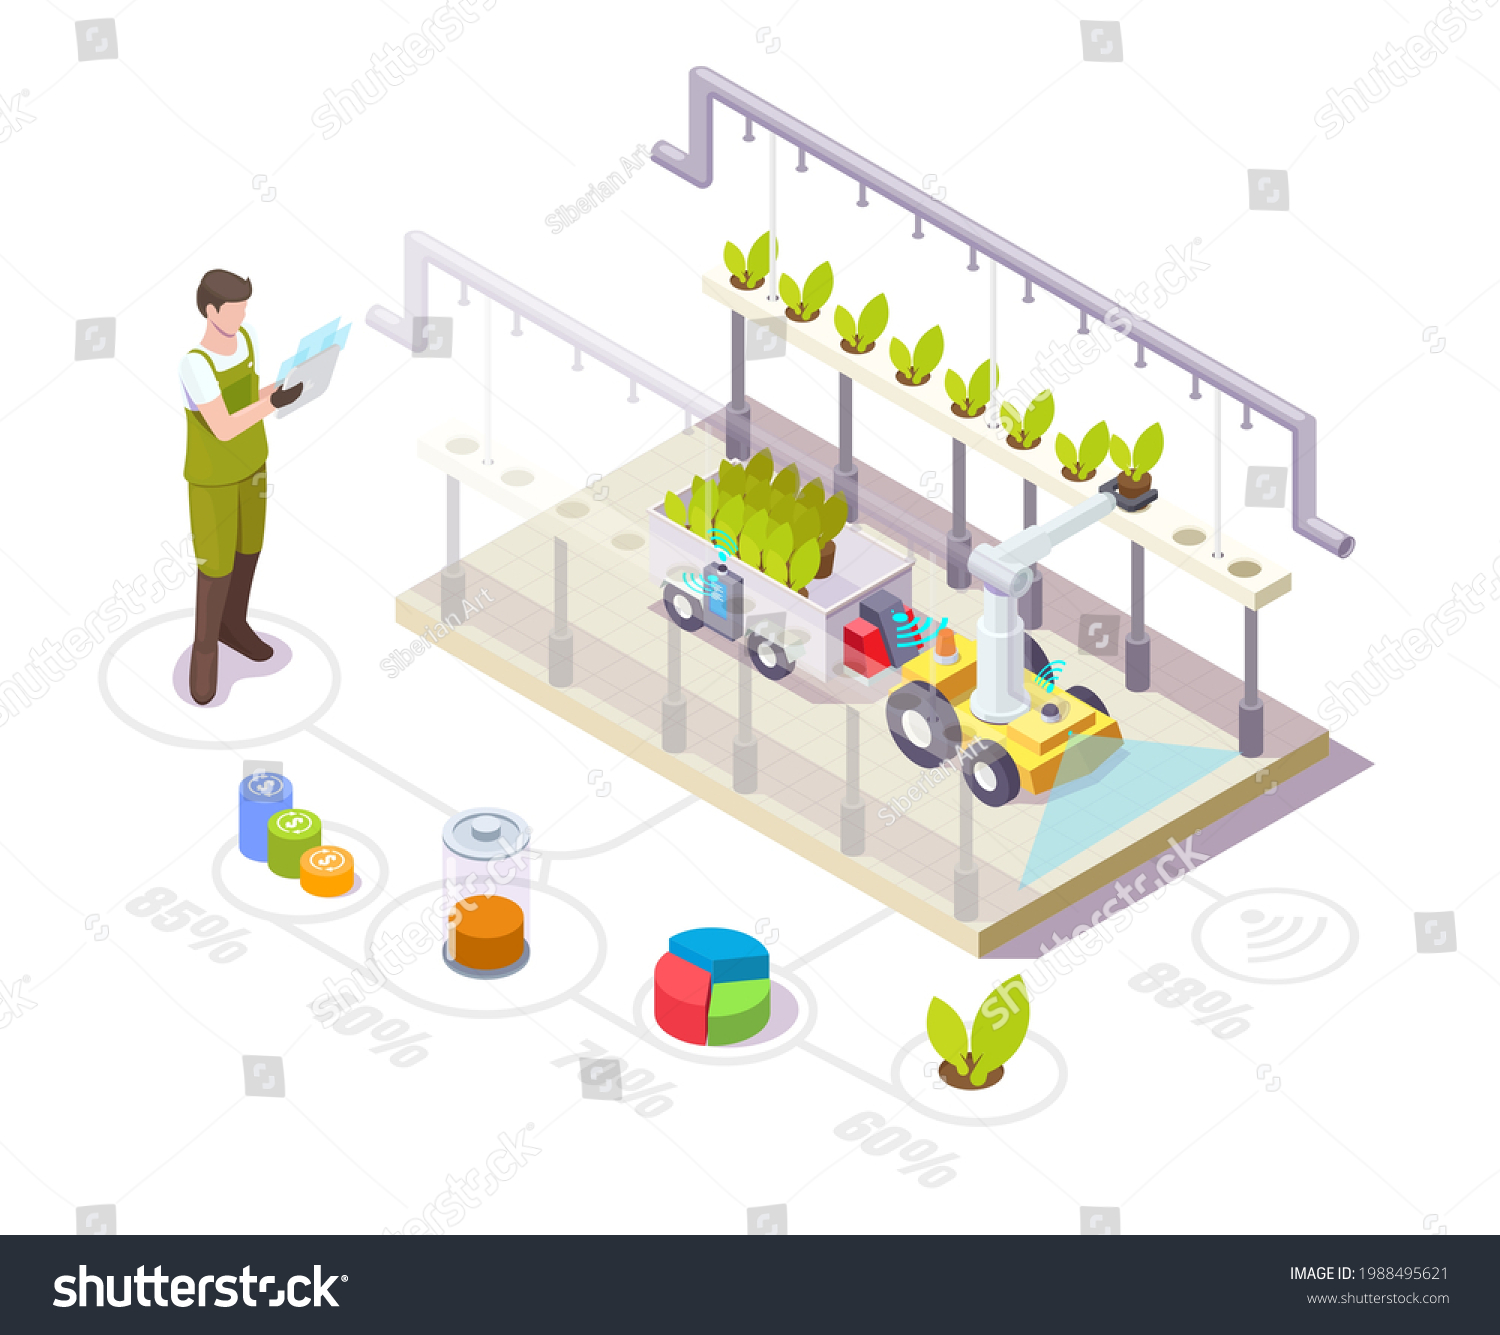 SVG of Robot working in greenhouse, flat vector isometric illustration. Automated glasshouse with robotic arm. Smart greenhouse horticulture robotics. Smart farming industry. svg